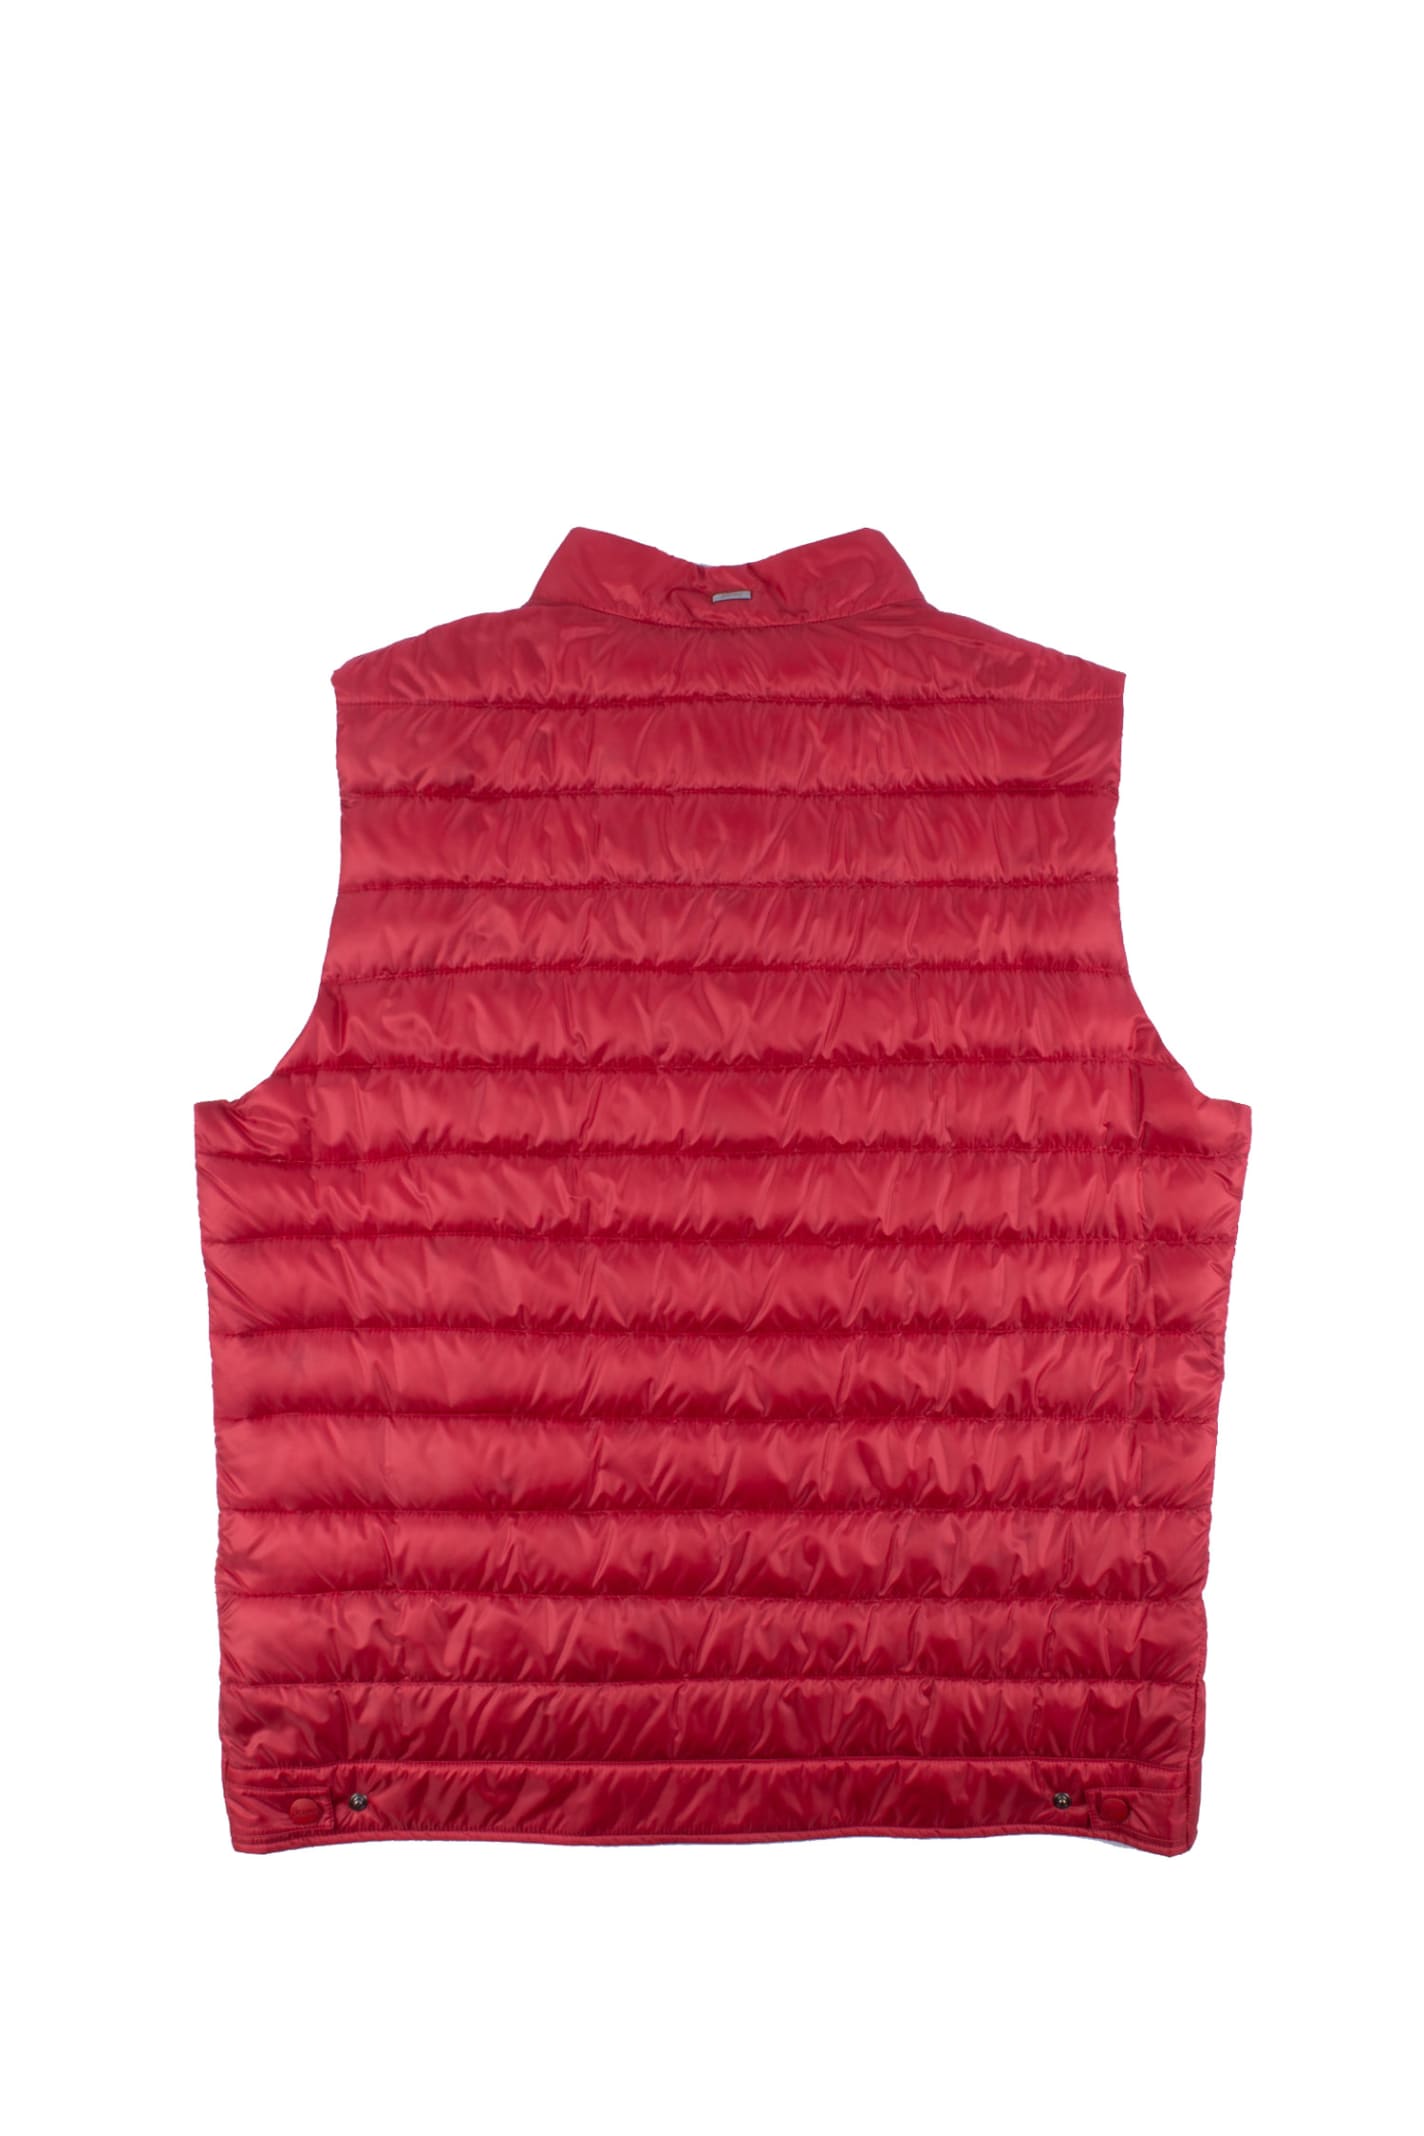 Shop Herno Nylon Sleeveless Down Jacket In Red